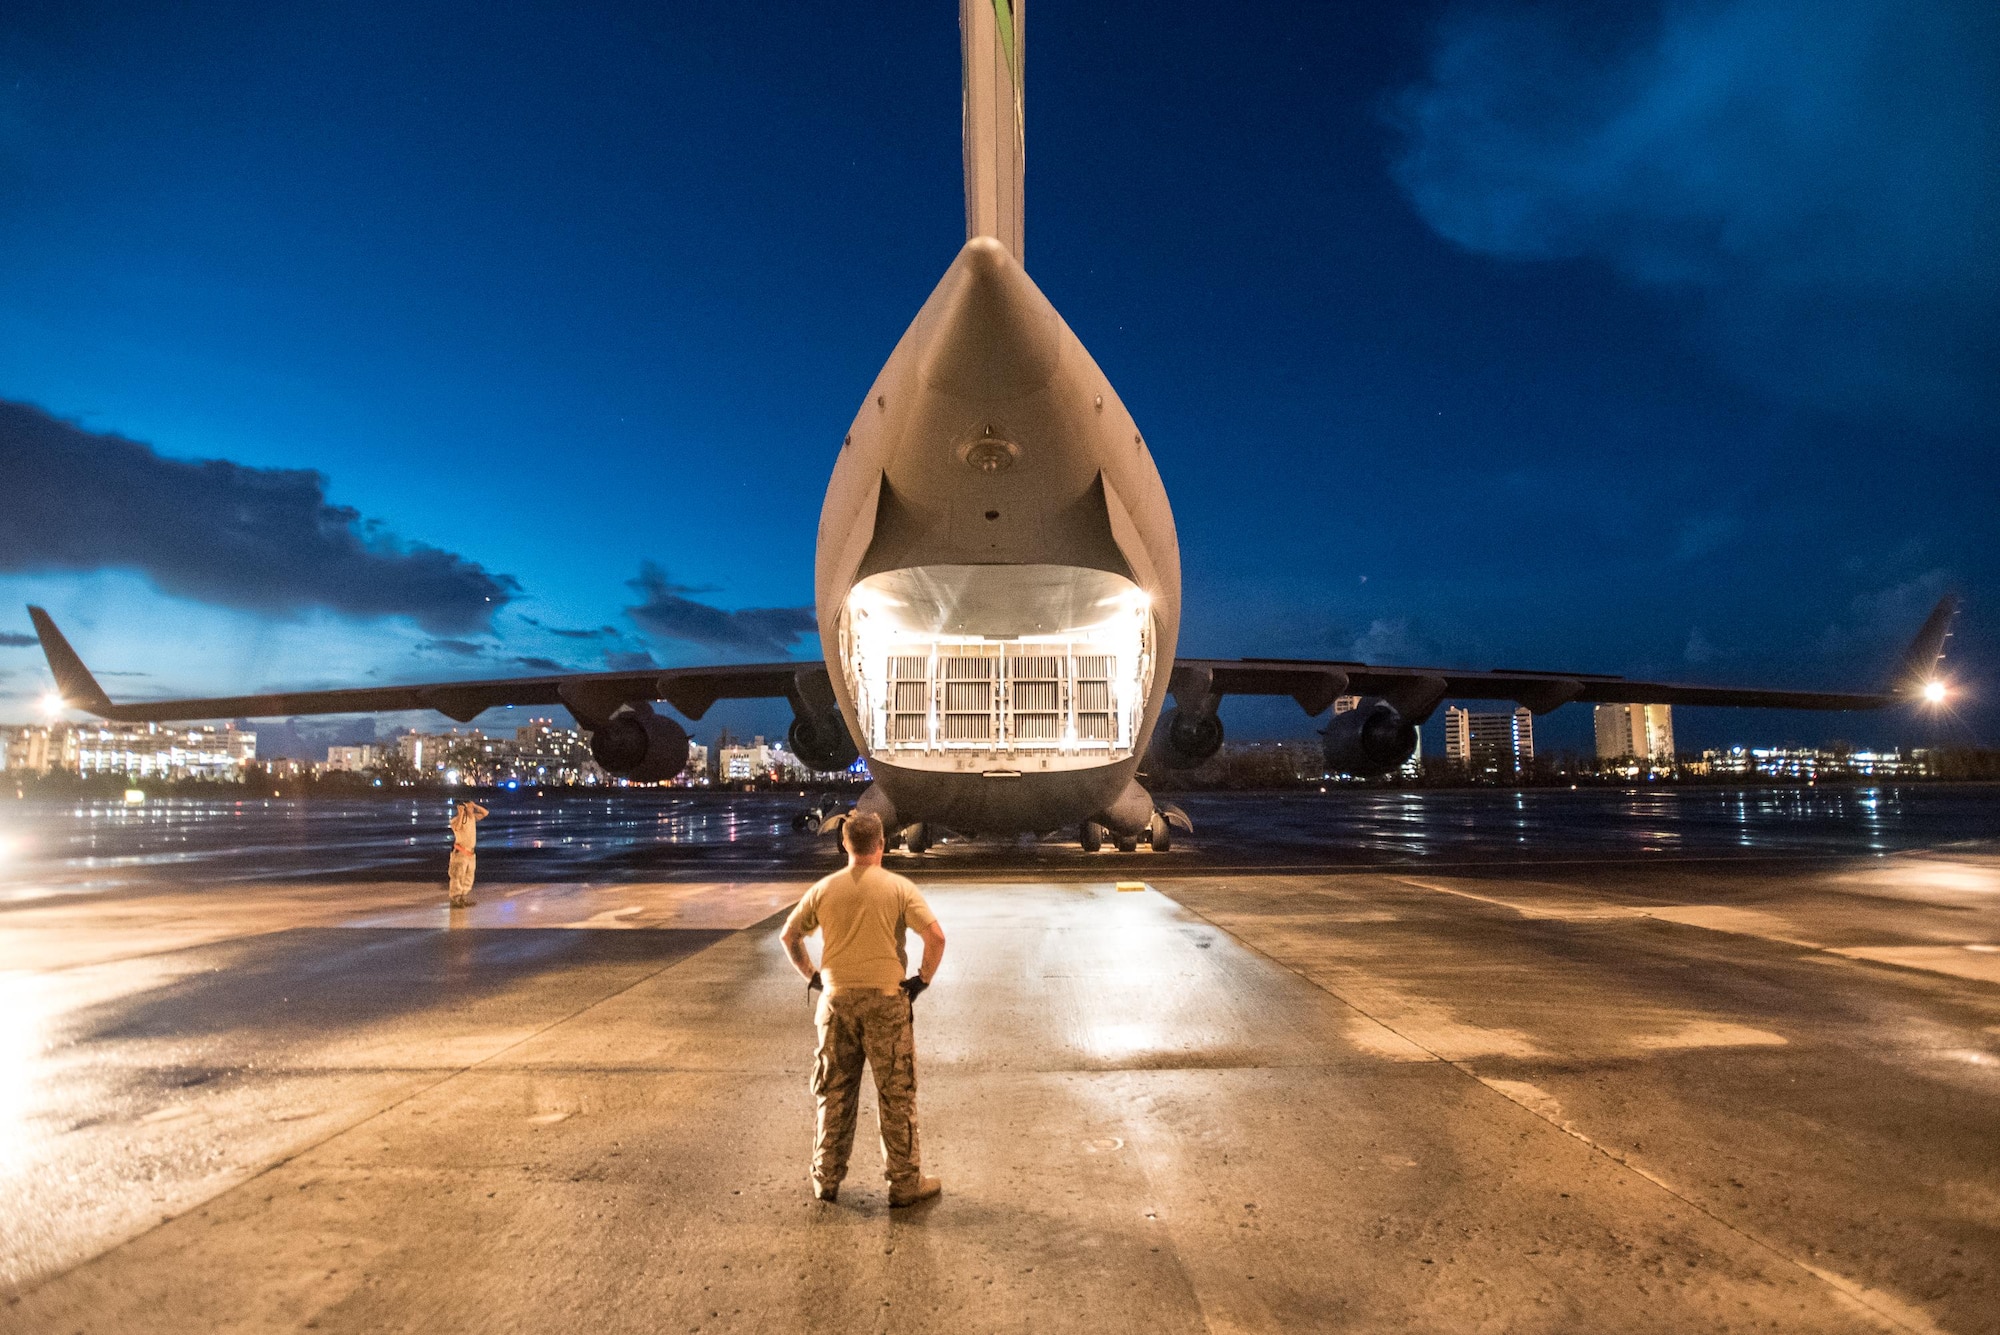 An Airman from the Kentucky Air National Guard’s 123rd Contingency Response Group waits to dowload relief supplies from a U.S. Air Force C-17 at Luis Muñoz Marín International Airport in San Juan, Puerto Rico, in the wake of Hurricane Maria Oct. 6, 2017. The unit’s Airmen established an aerial port of debarkation upon arrival here Sept. 23, and have processed more than 7.2 million pounds of cargo and humanitarian aid for distribution in the first three weeks of the operation. (U.S. Air National Guard photo by Lt. Col. Dale Greer)